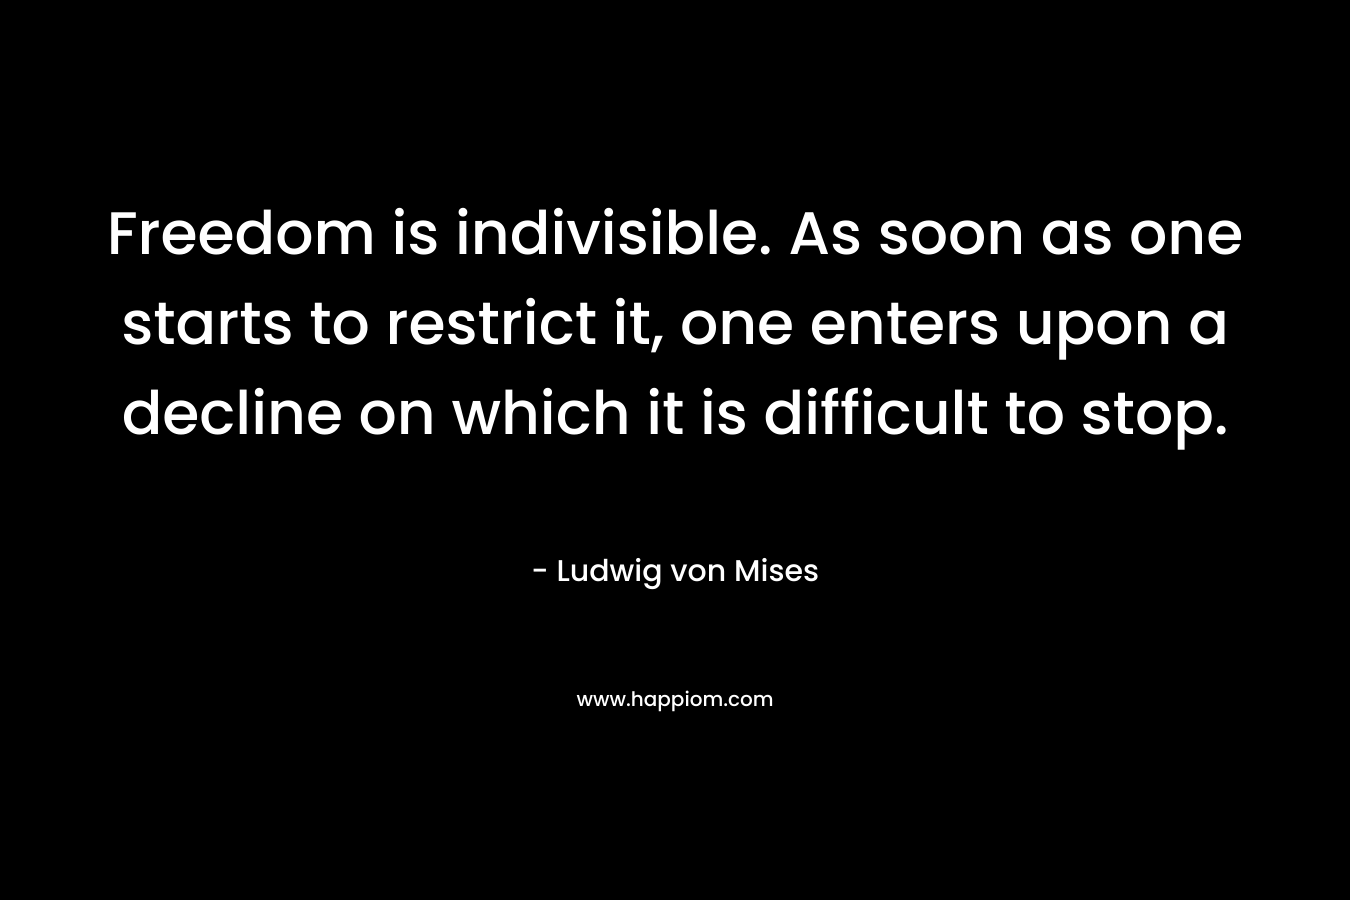 Freedom is indivisible. As soon as one starts to restrict it, one enters upon a decline on which it is difficult to stop. – Ludwig von Mises